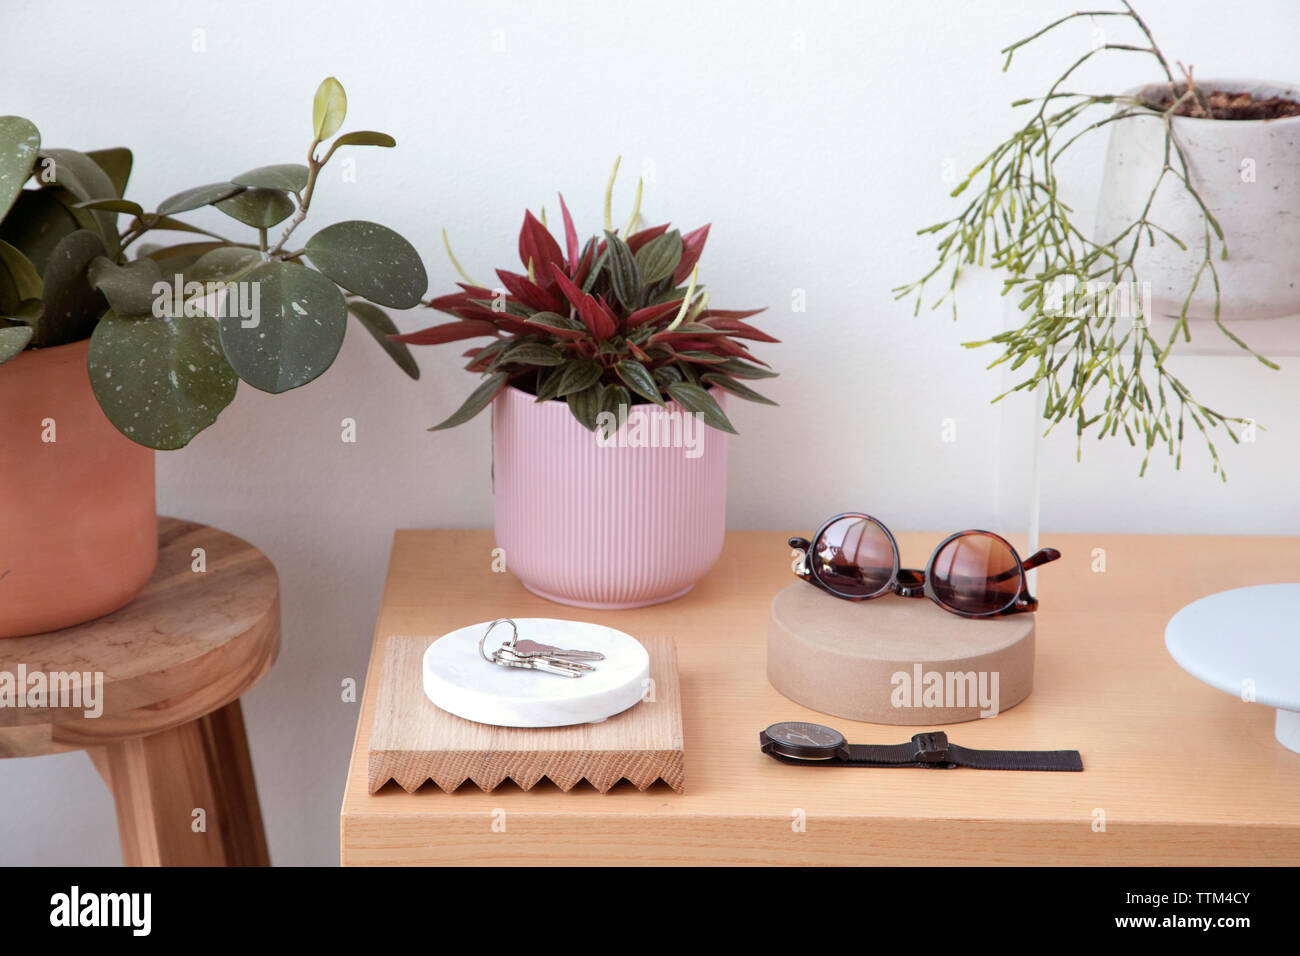 High angle view of personal accessories with plants and keys arranged on wooden table against wall at home Stock Photo